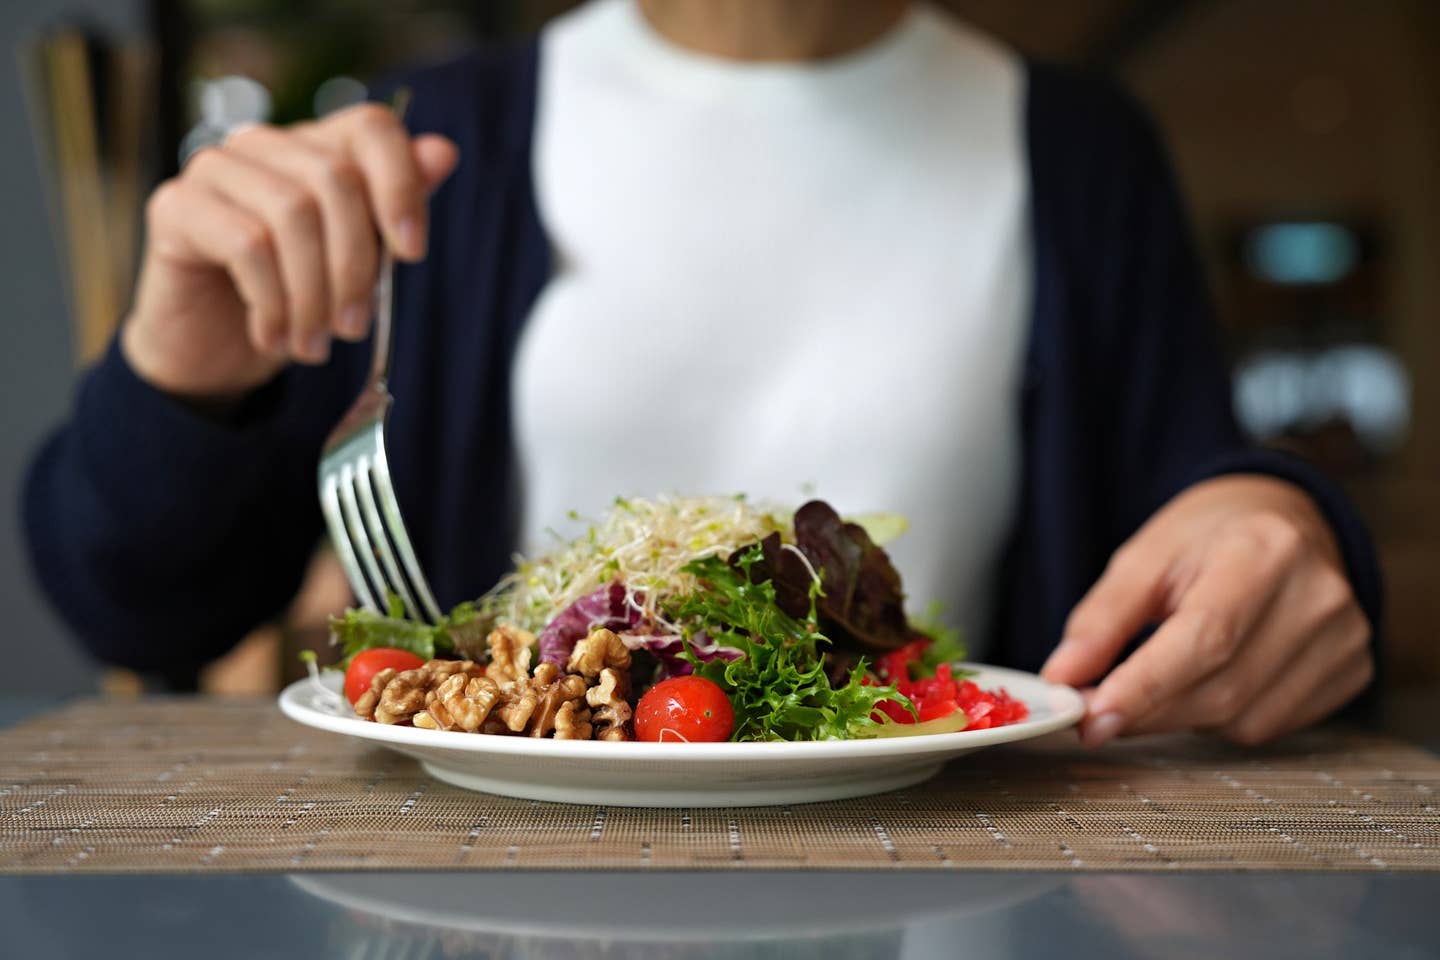 A plate of vegan salad featuring healthy plant-based foods including nuts, greens, and tomatoes, and alfalfa sprouts, with the body of a woman visible sitting behind the plate